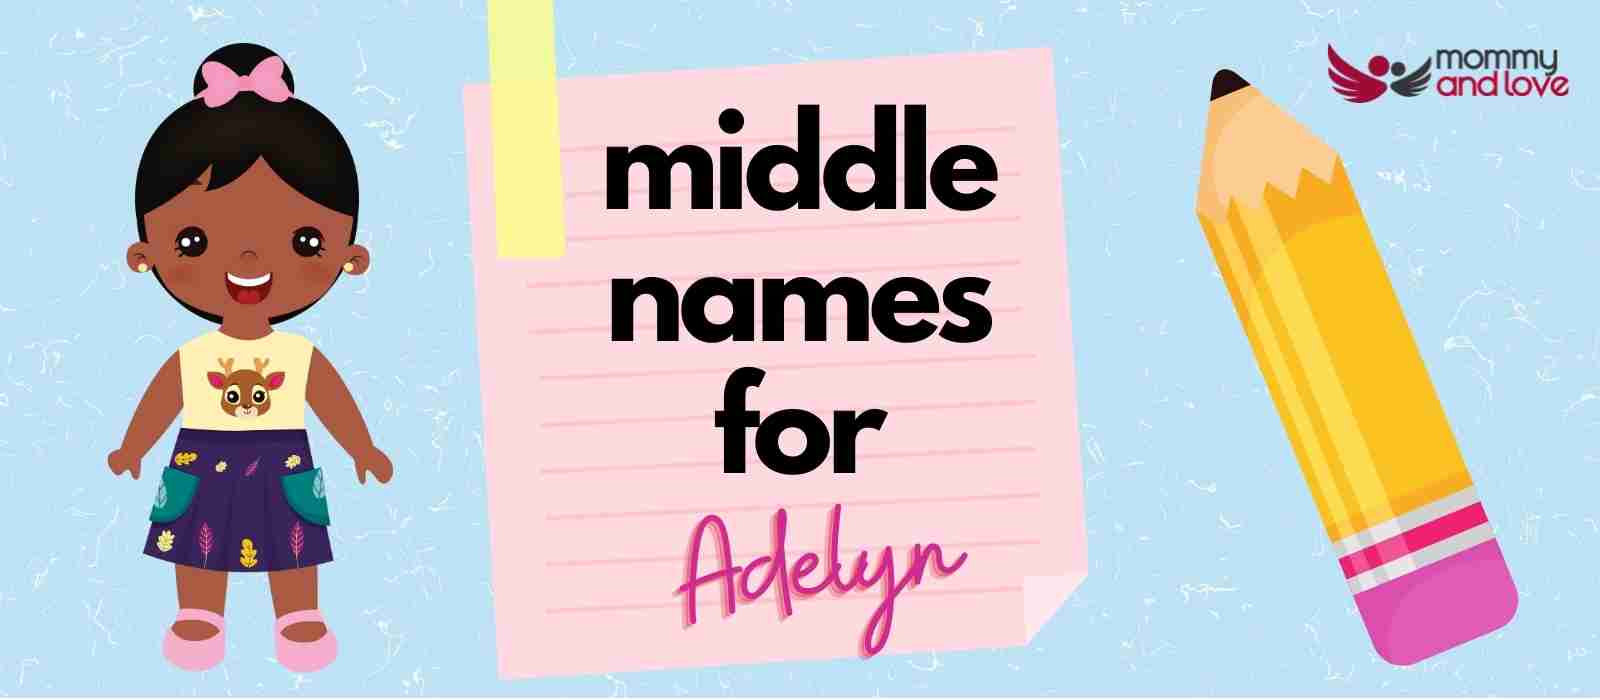 Middle Names for Adelyn